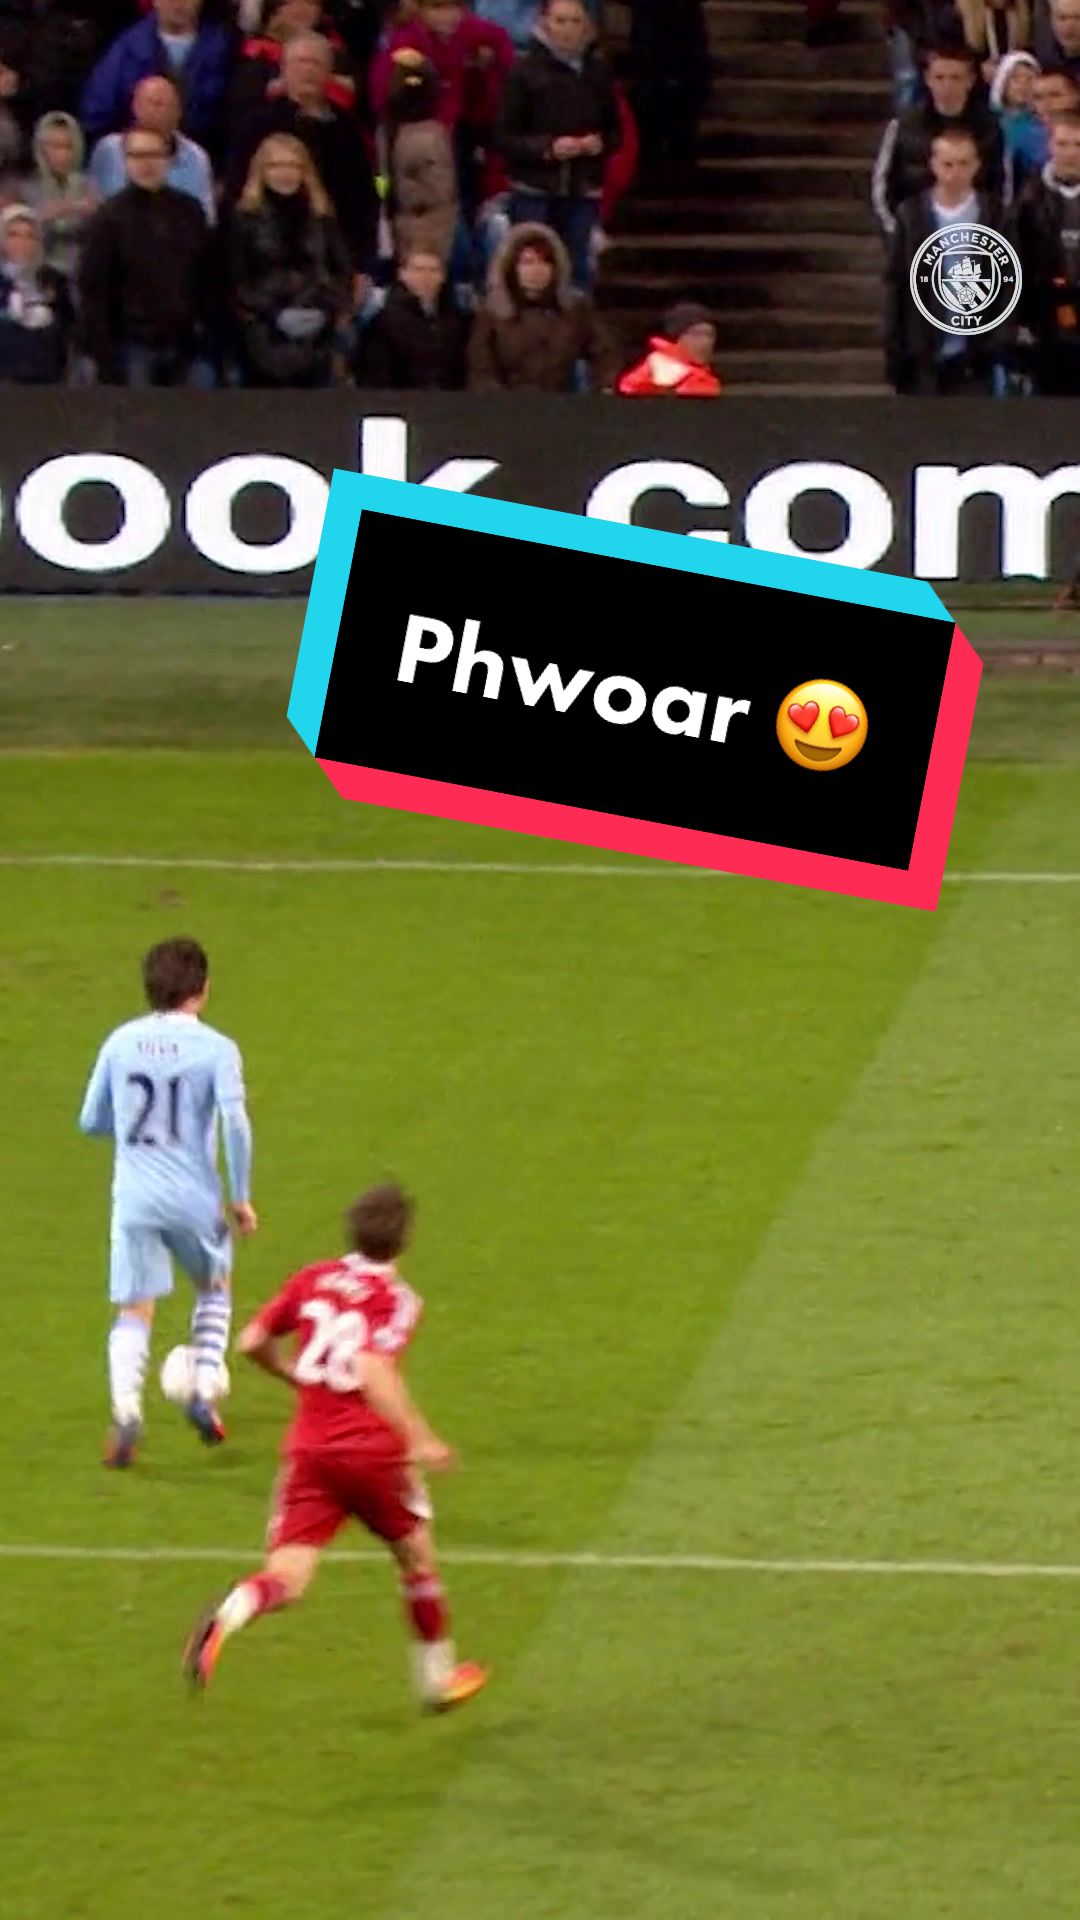 mancity@tiktok on Pinno: Who remembers this beauty from David Sil...